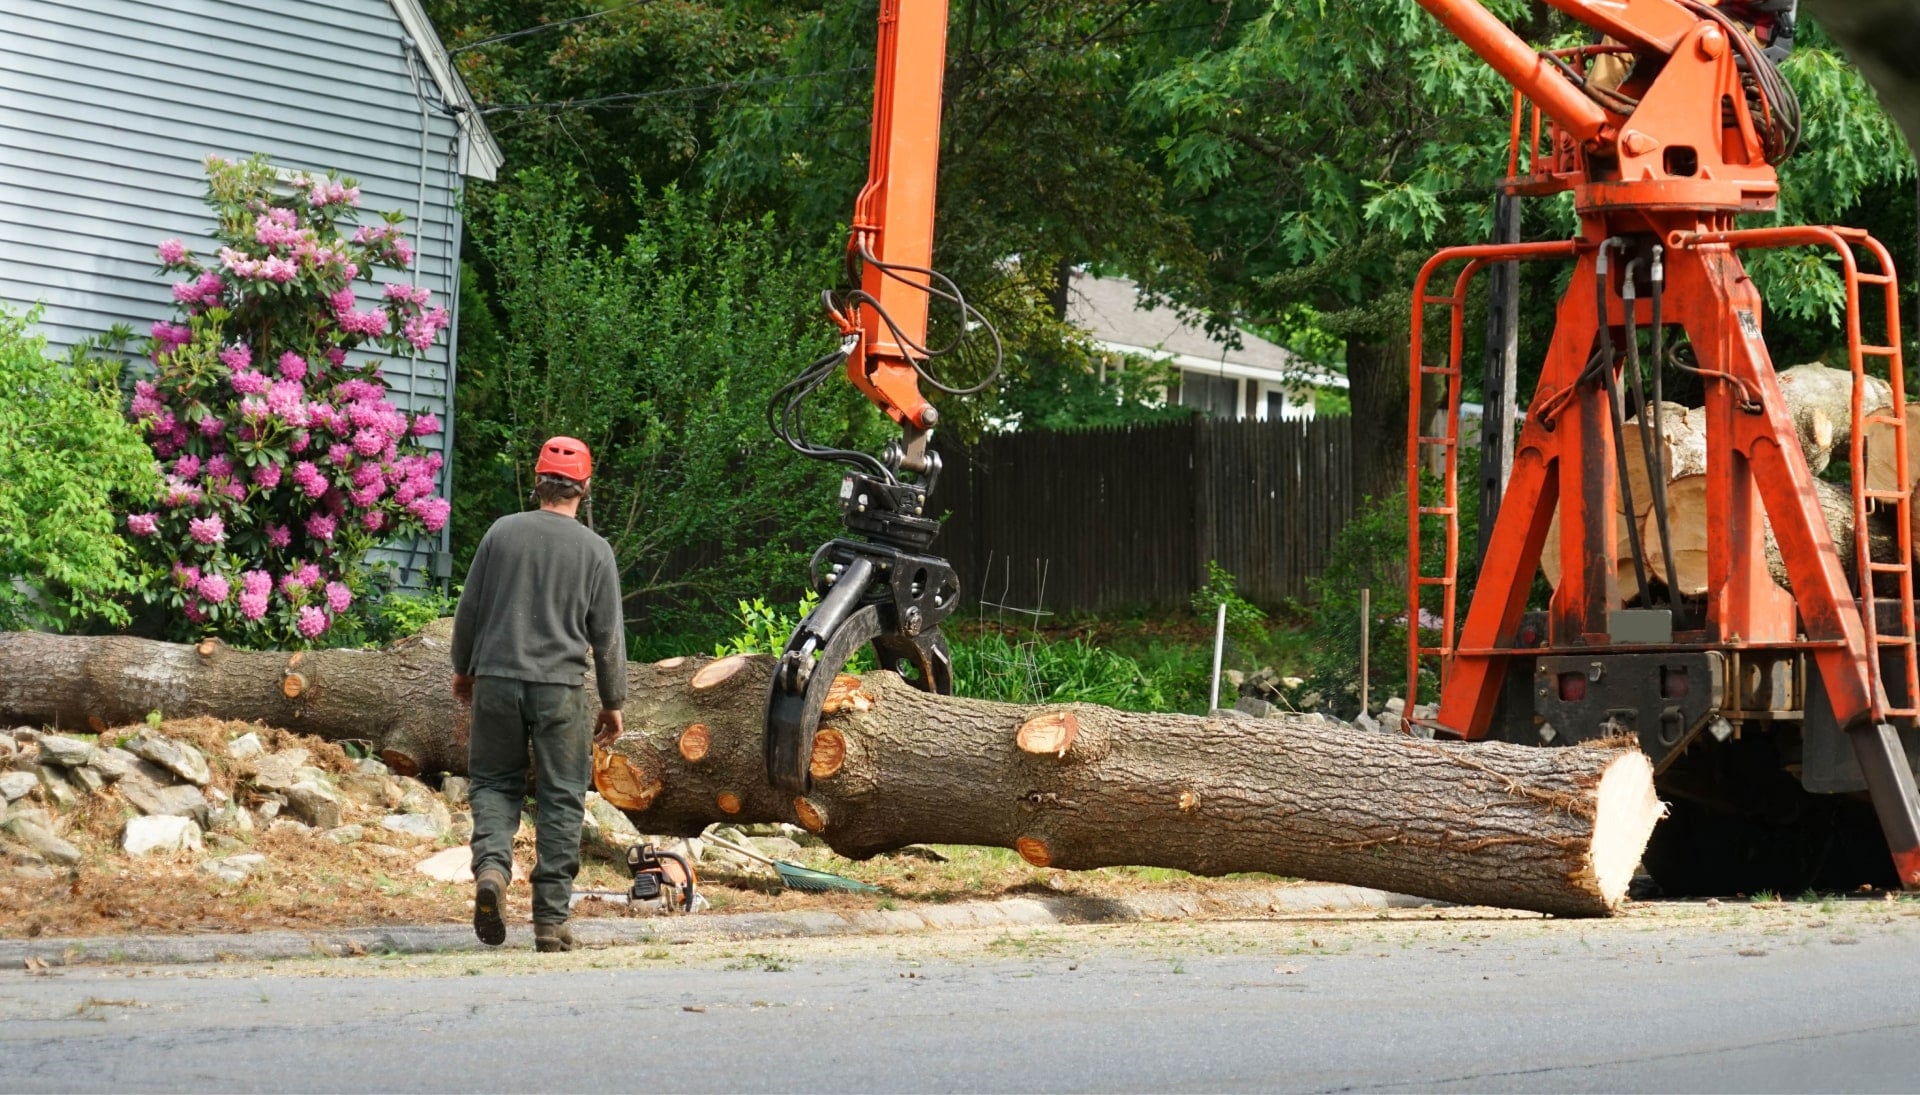 Local partner for Tree removal services in New York City